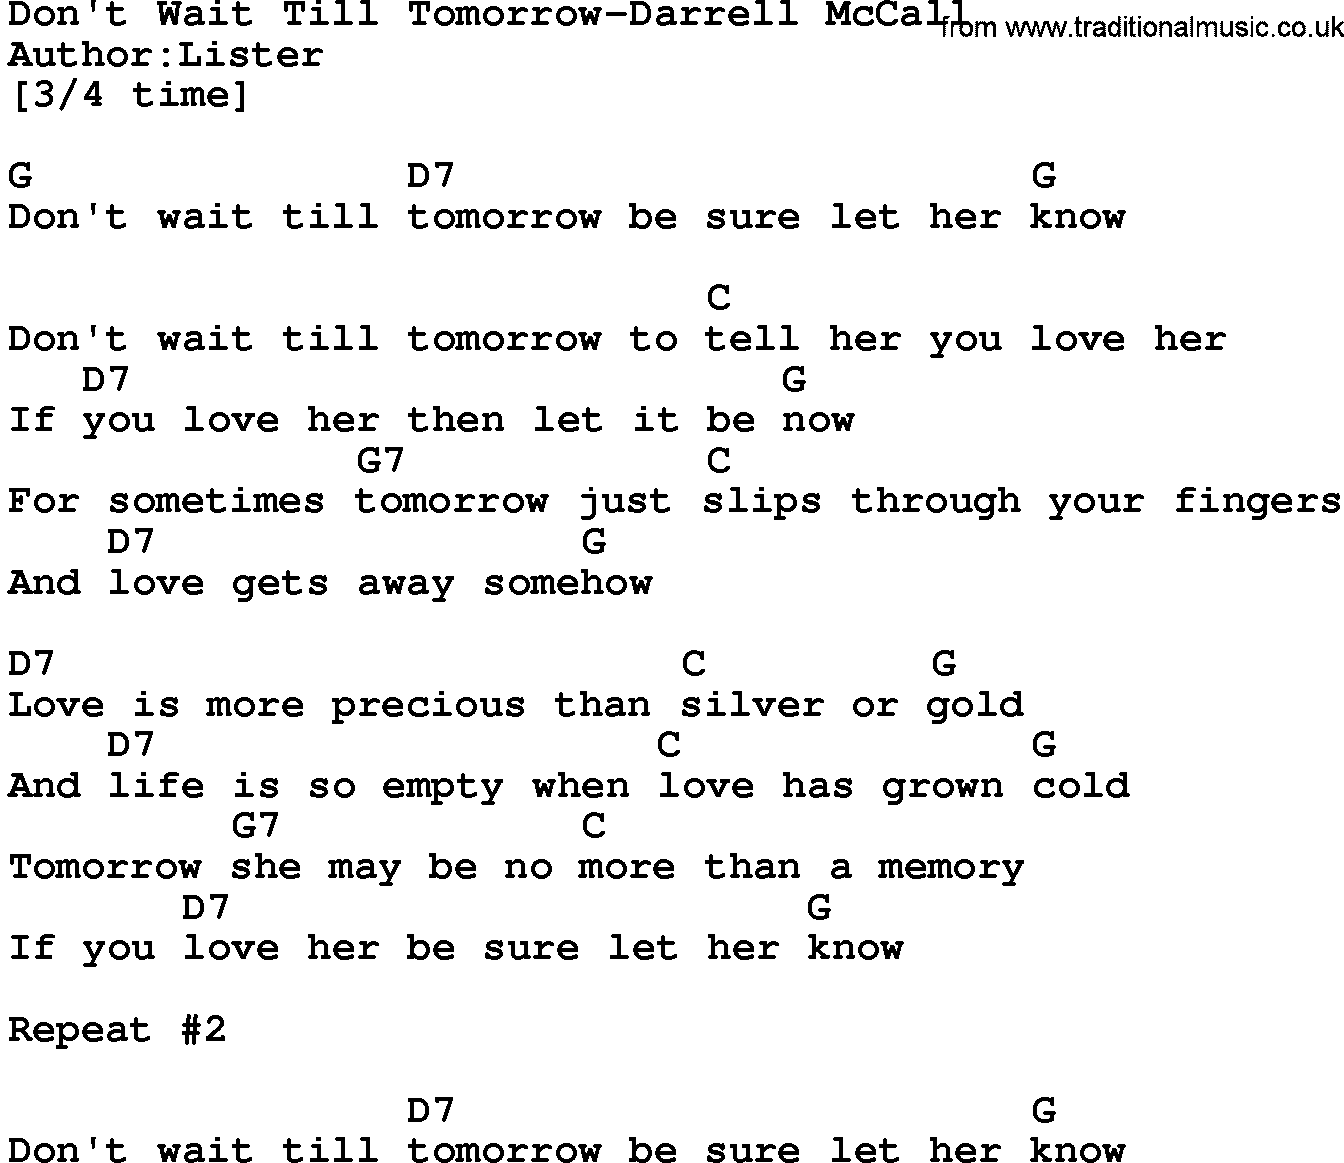 Country music song: Don't Wait Till Tomorrow-Darrell Mccall lyrics and chords